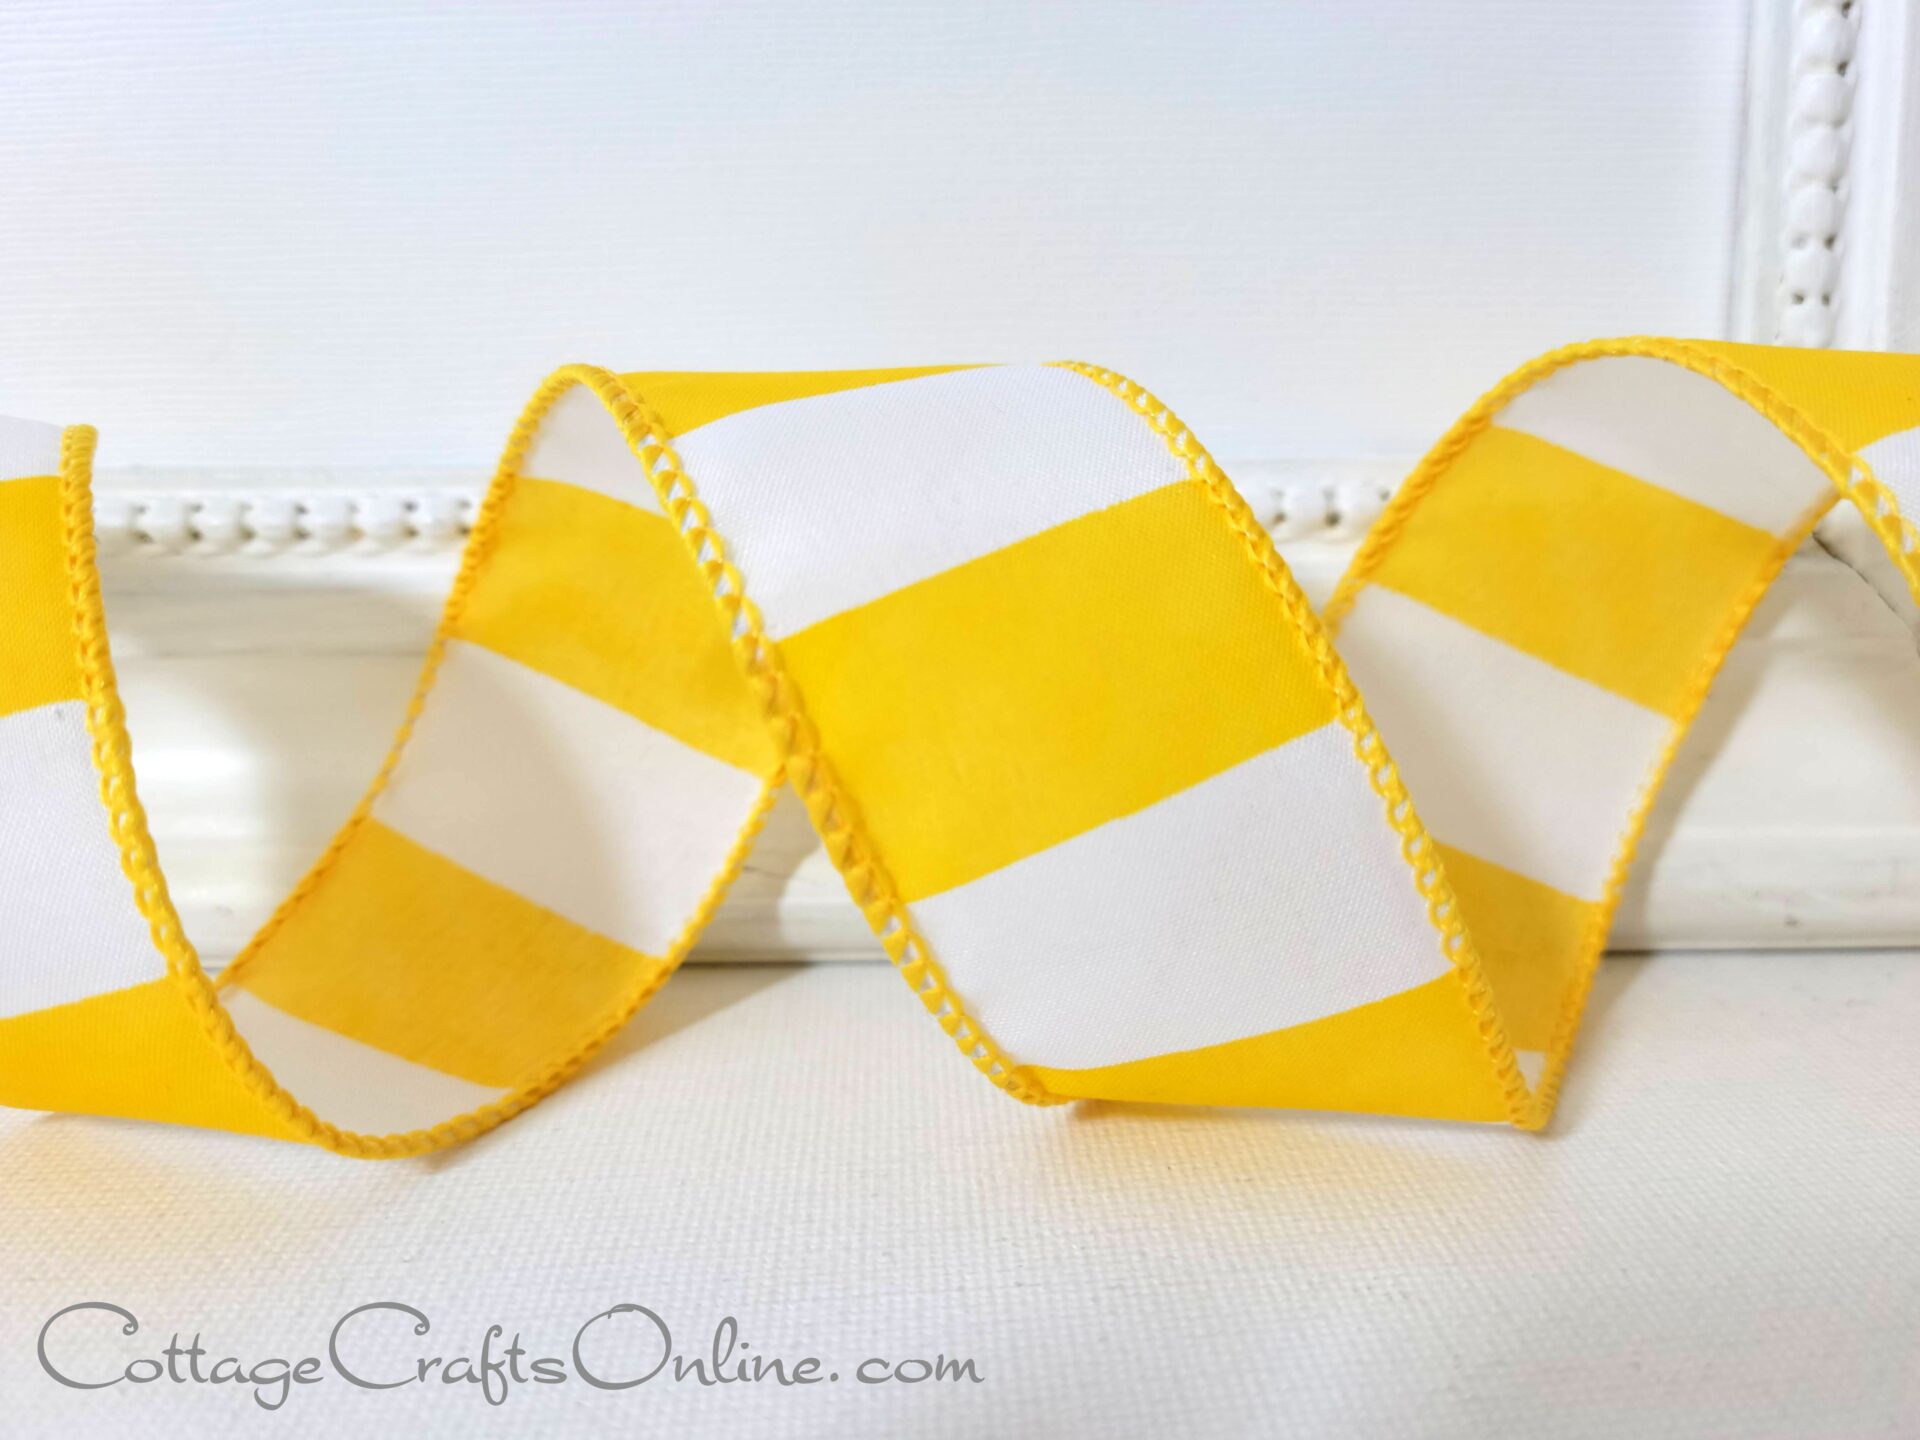 A yellow and white striped ribbon sitting on top of a table.